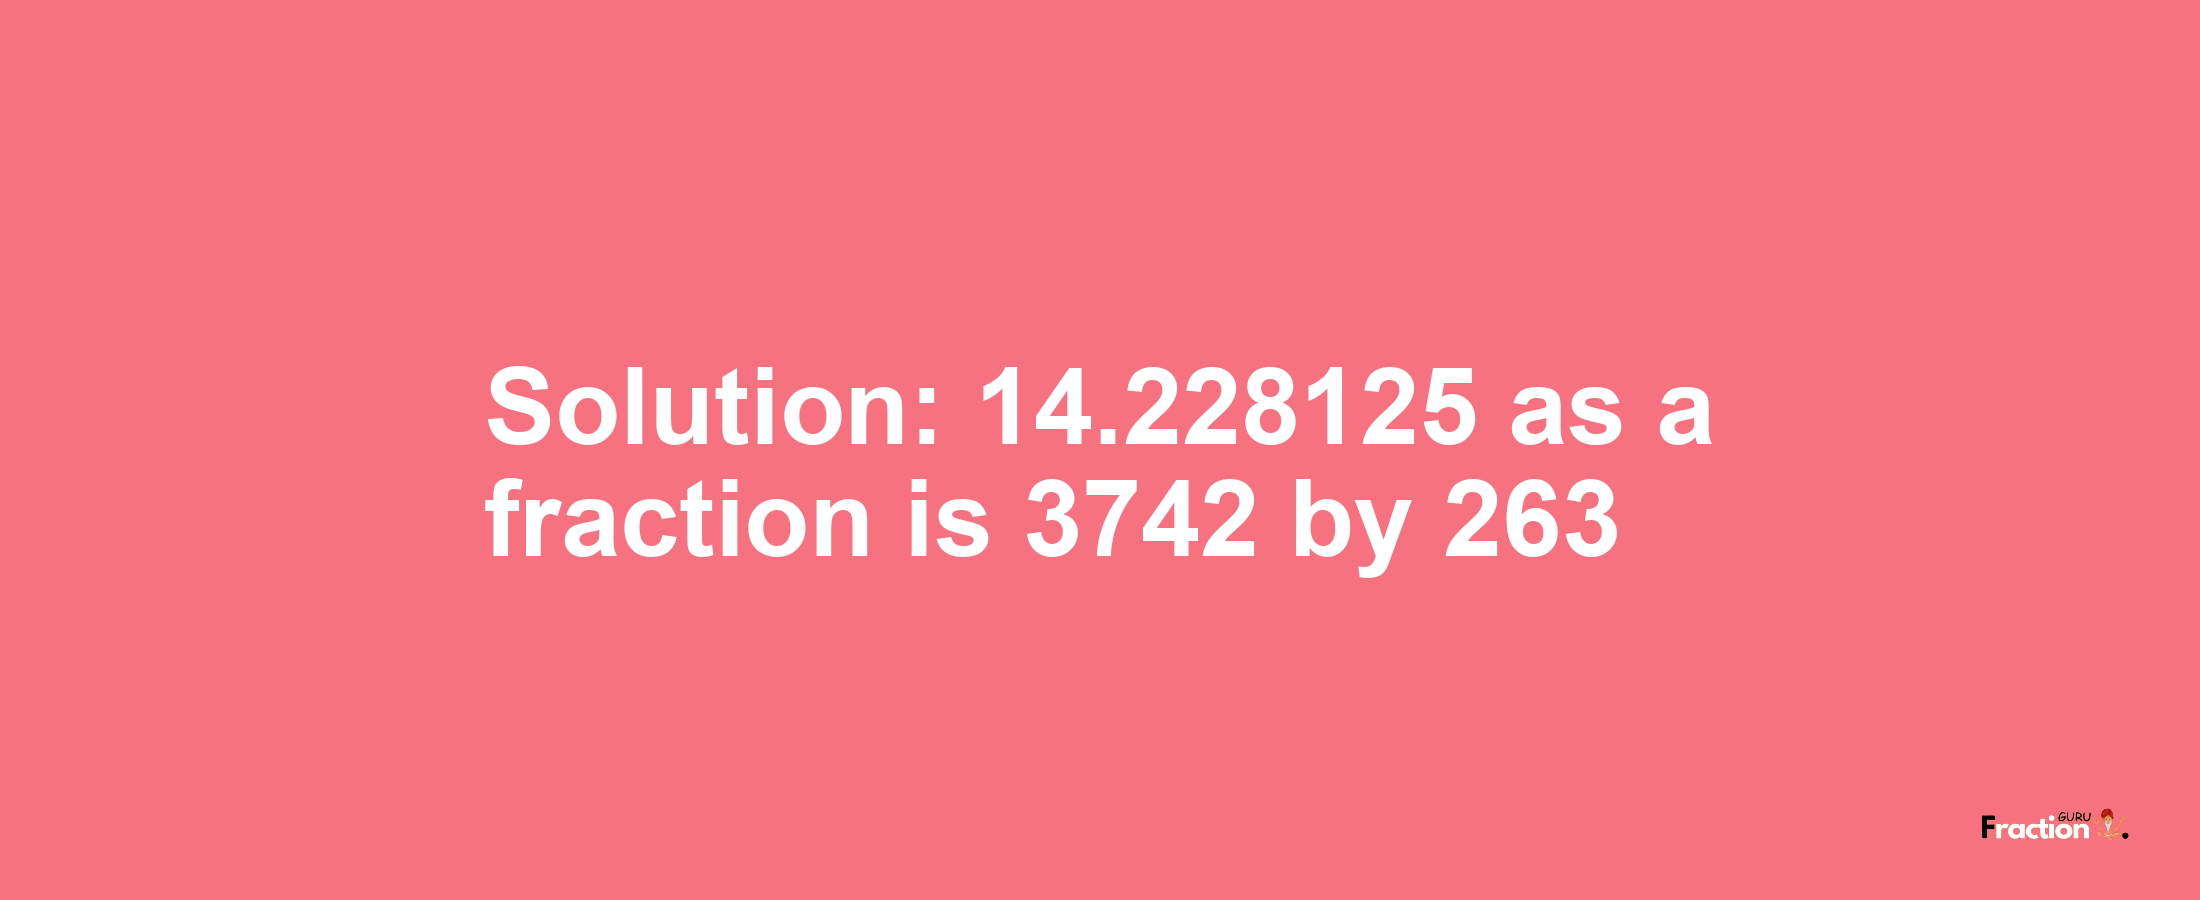 Solution:14.228125 as a fraction is 3742/263